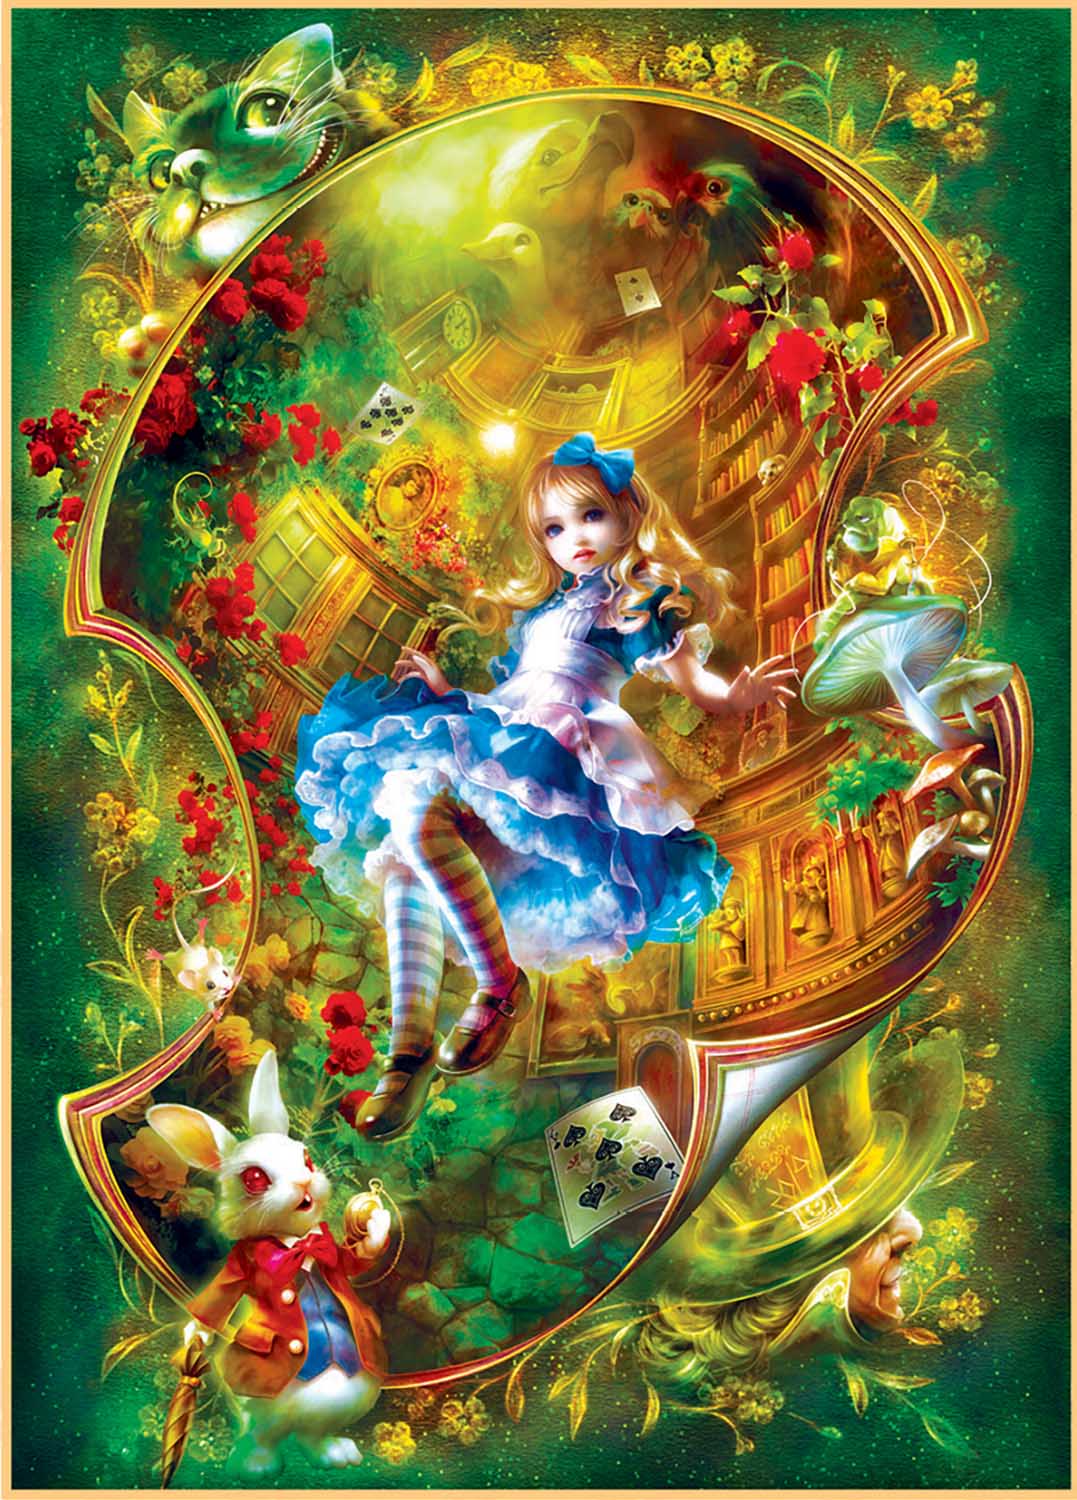 Alice in Wonderland - Scratch and Dent Fantasy Jigsaw Puzzle